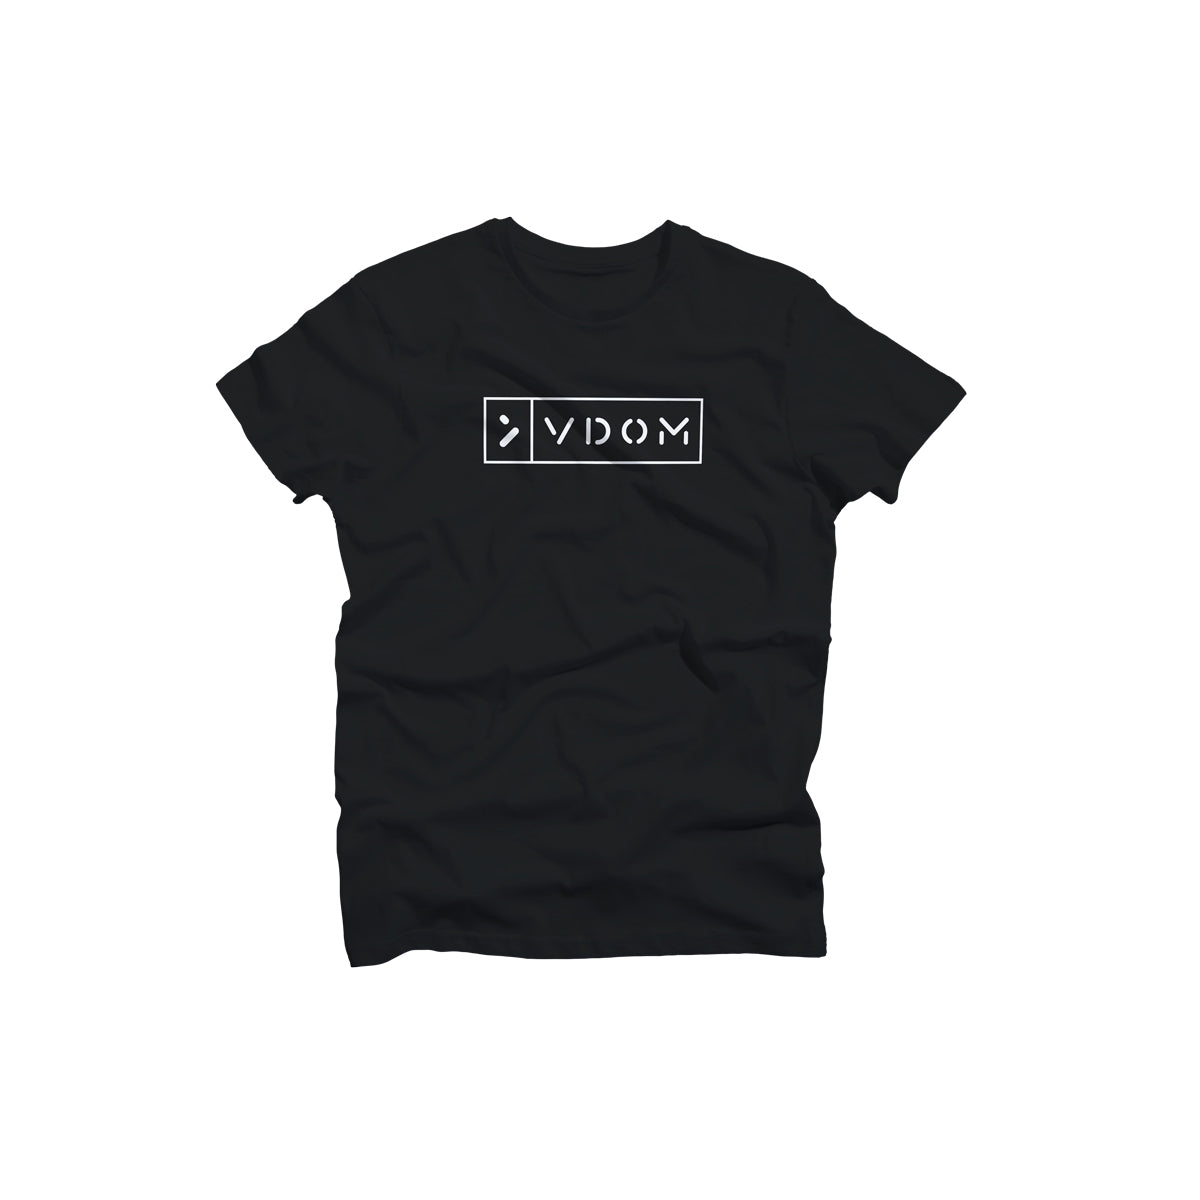 The VDOM Classic Tee